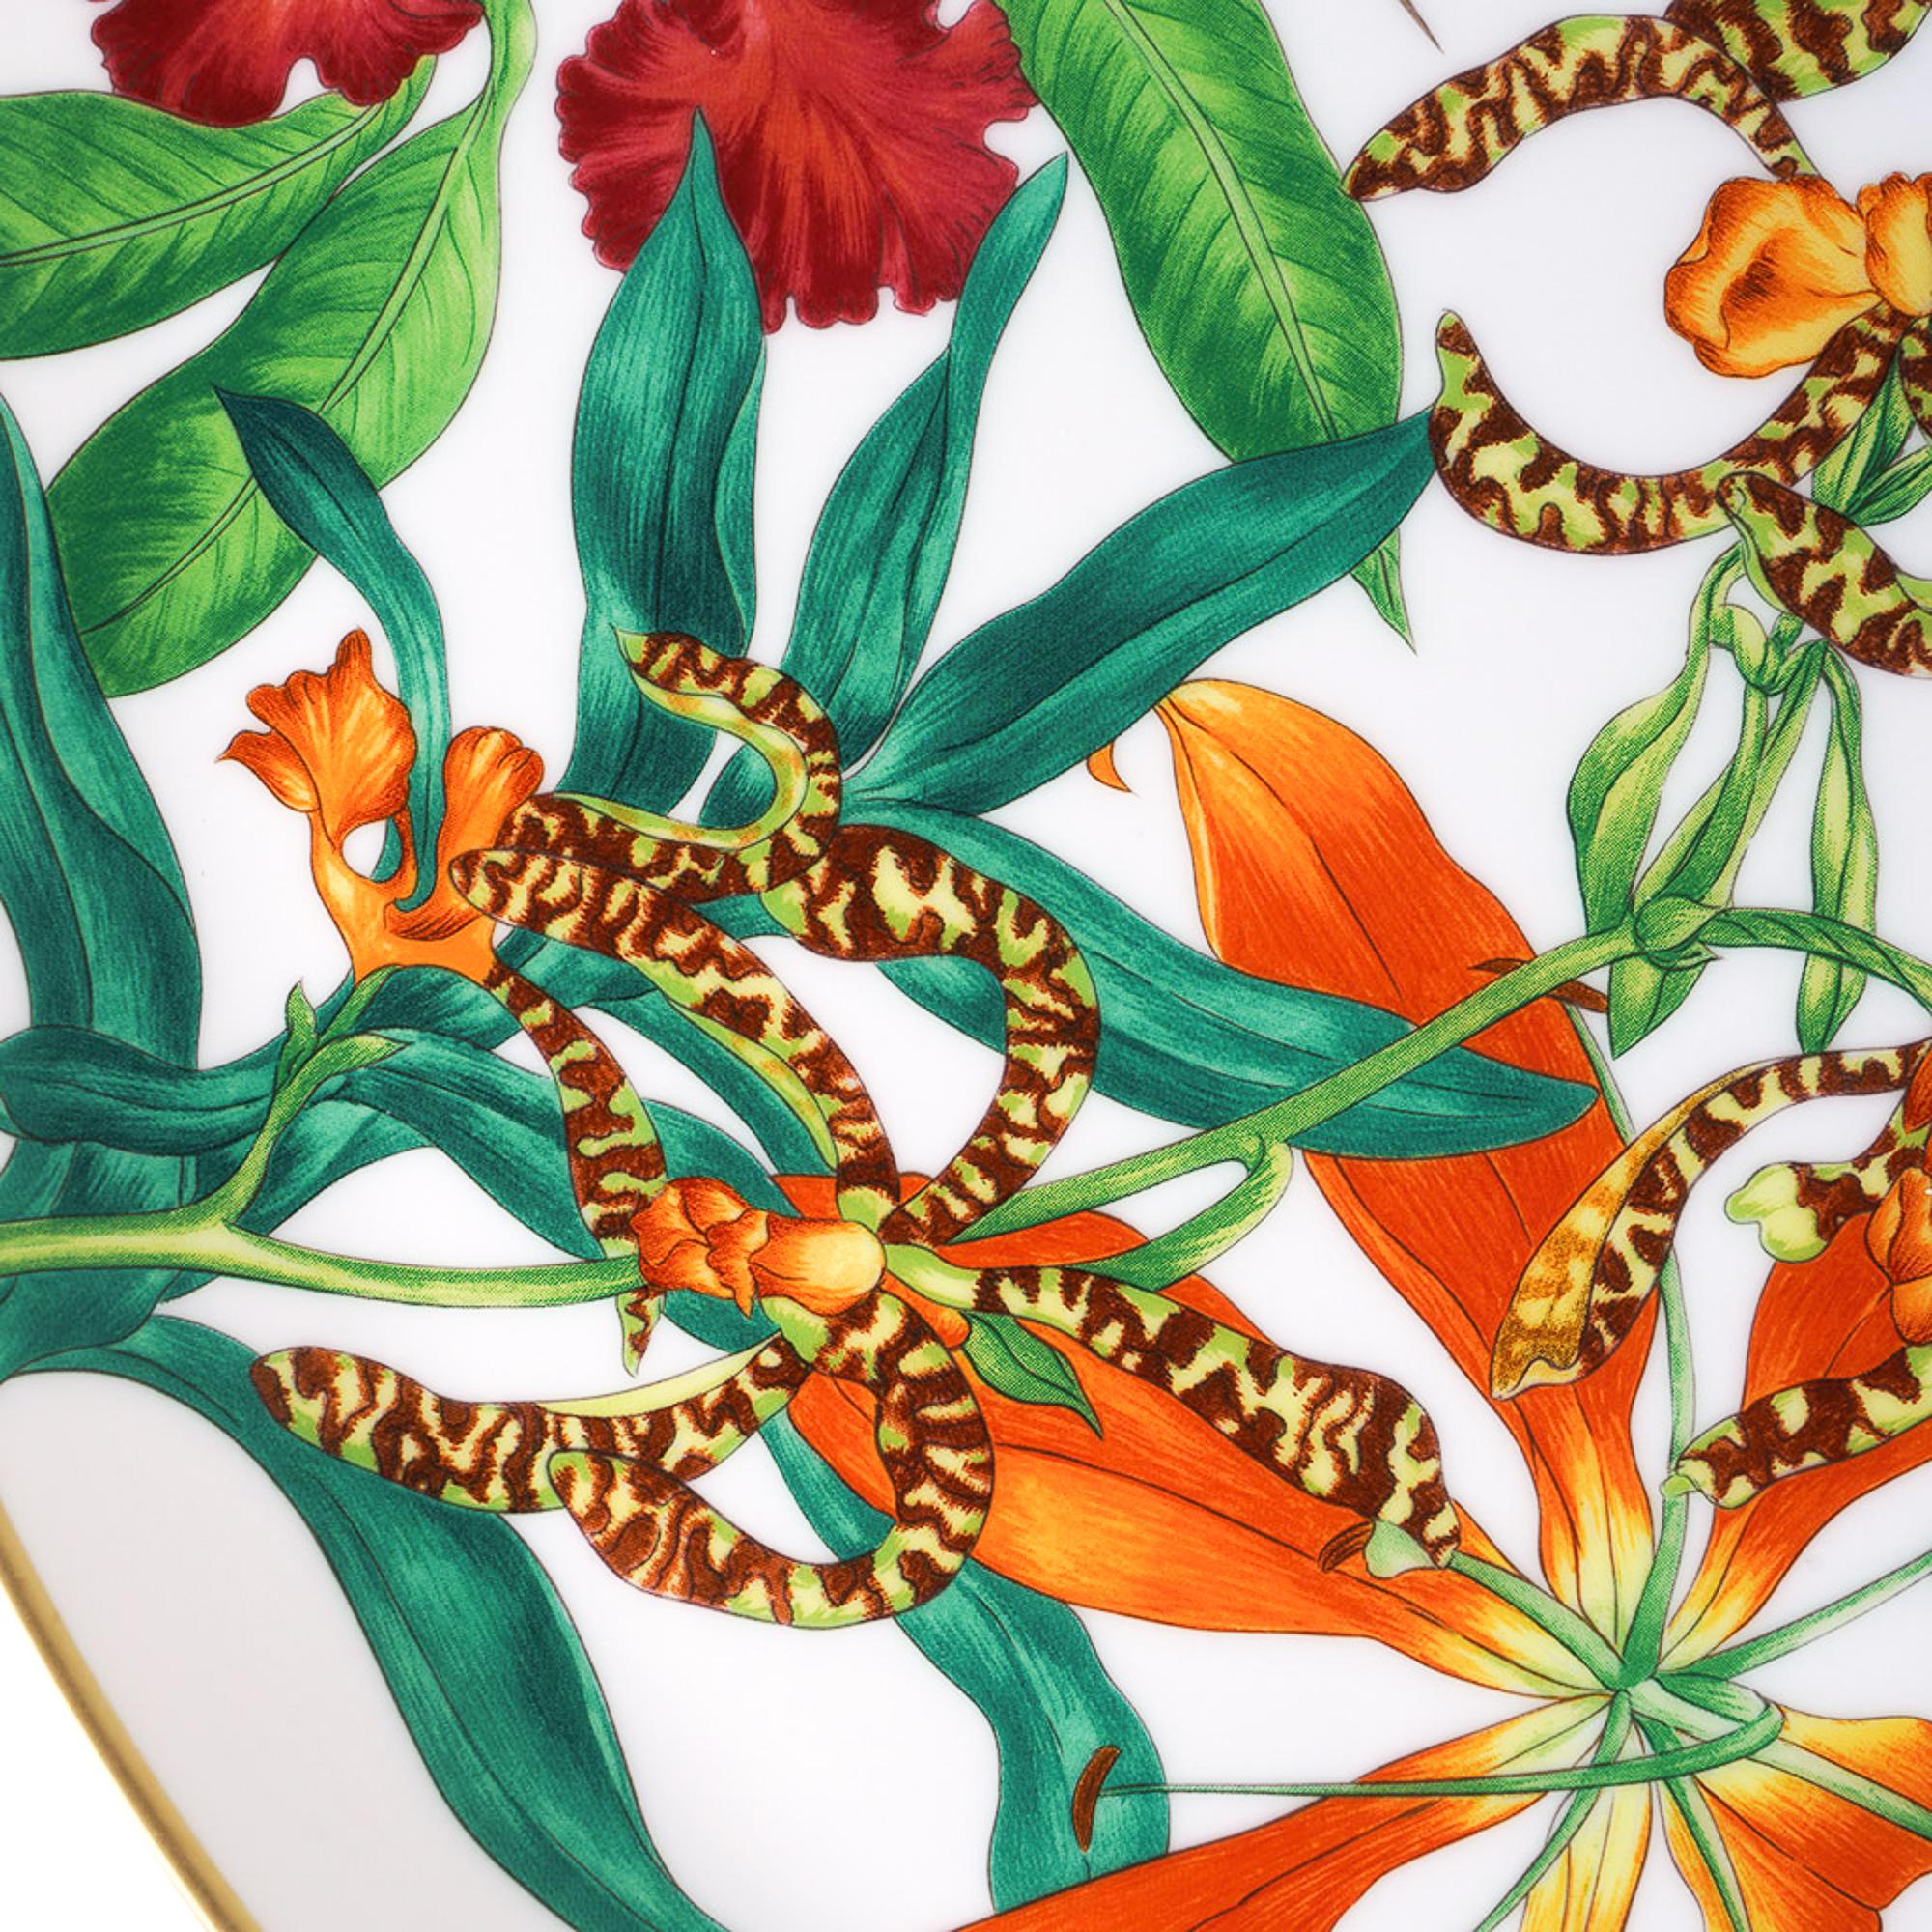 Mightychic offers an Hermes Tart Platter featured in the classic Hermes Passifolia pattern.
A beautiful hommage to the peace and power of flora.
Decorated using Chromolithography.
Hand-painted 24K gold trim.
Designed by Nathalie Rolland-Huckel.
New